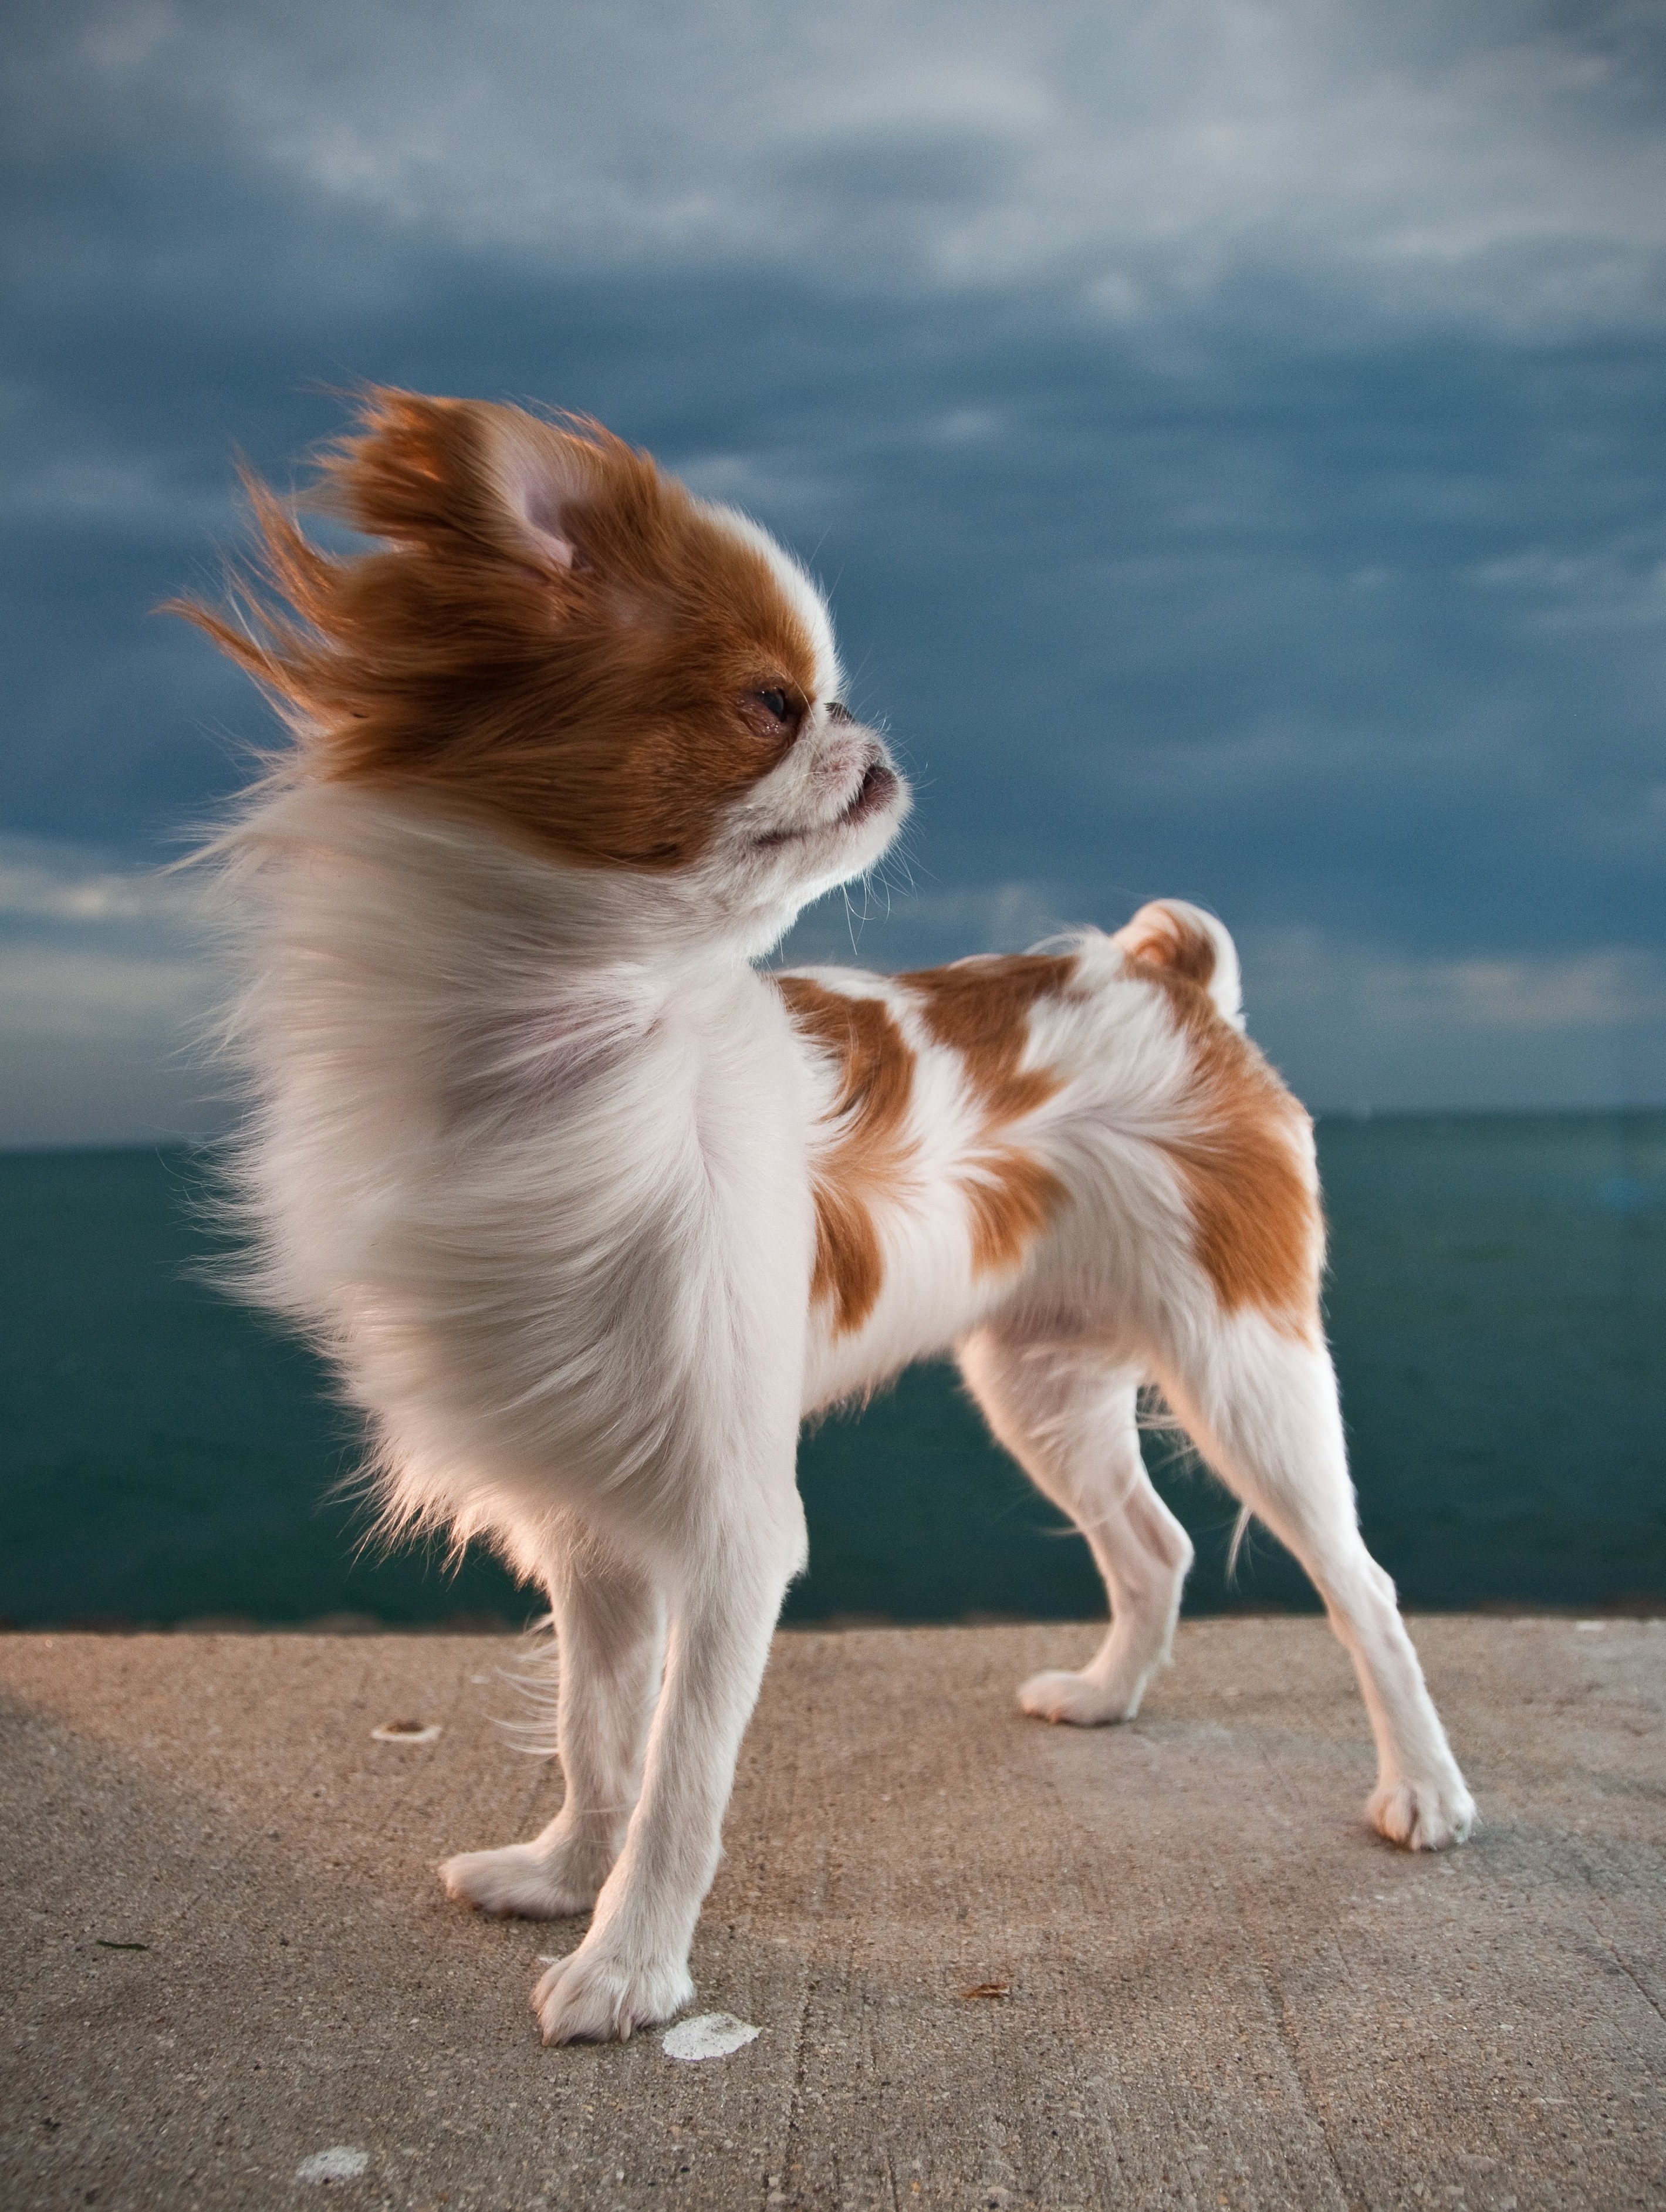 A Japanese Chin standing on the pavement by the beach